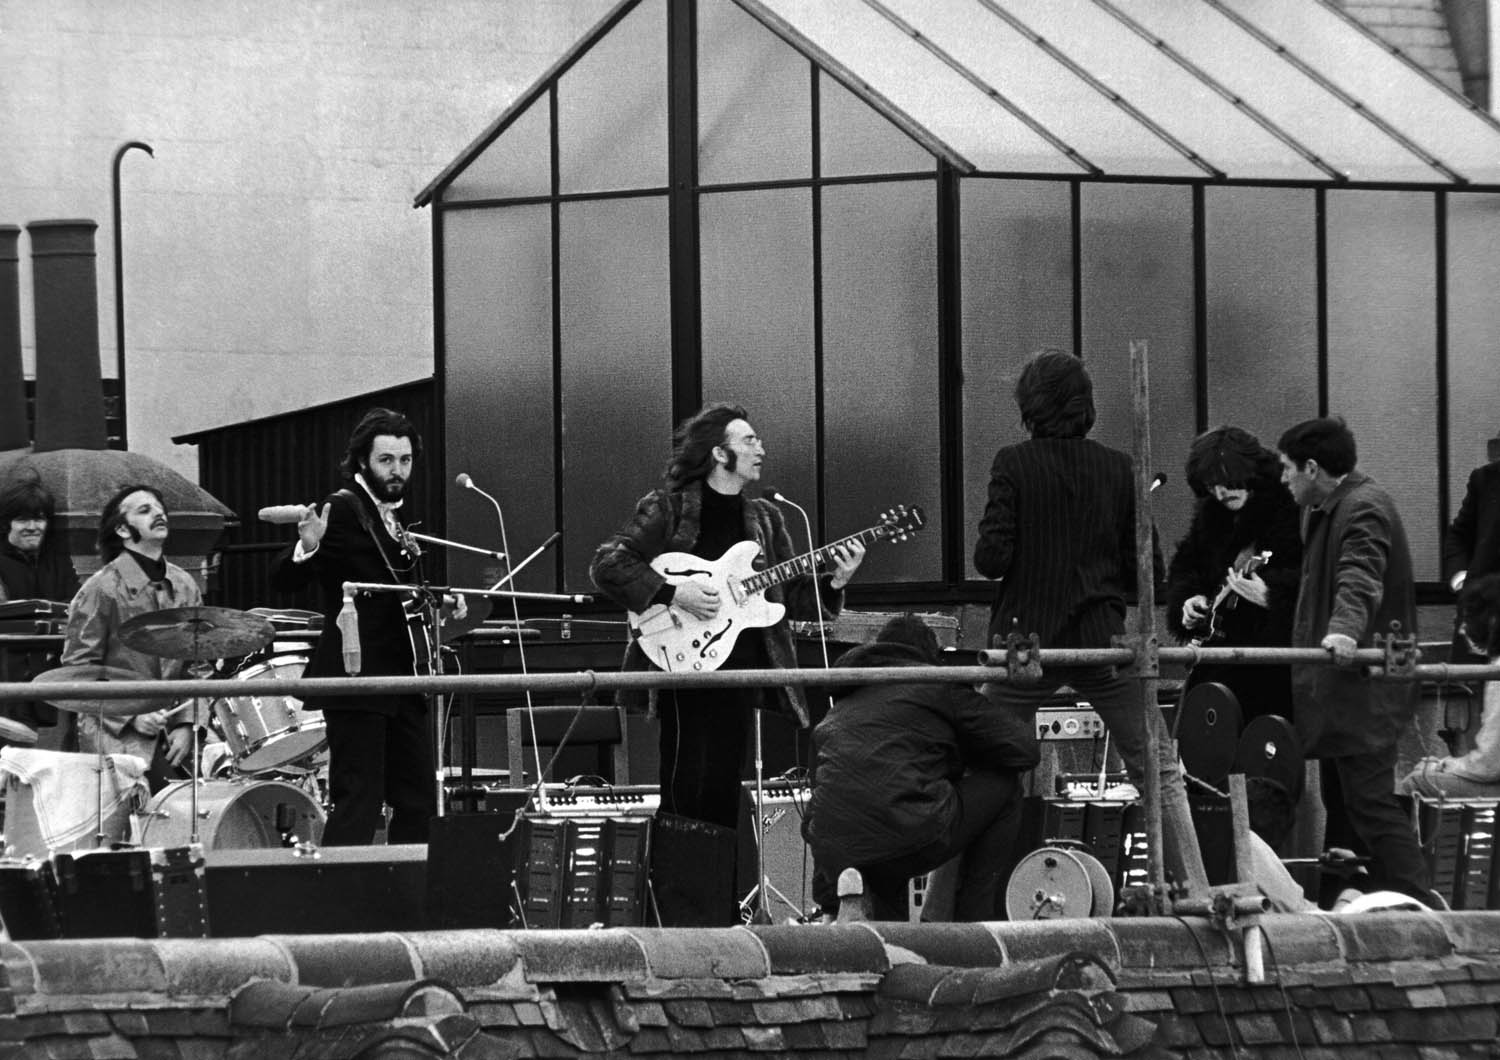 British pop band The Beatles, aka John Lennon, Paul McCartney, George Harrison and Ringo Starr, staging their final, legendary public performance on the rooftop of the Apple Corps HQ at 3 Saville Row in London, January 30th 1969.